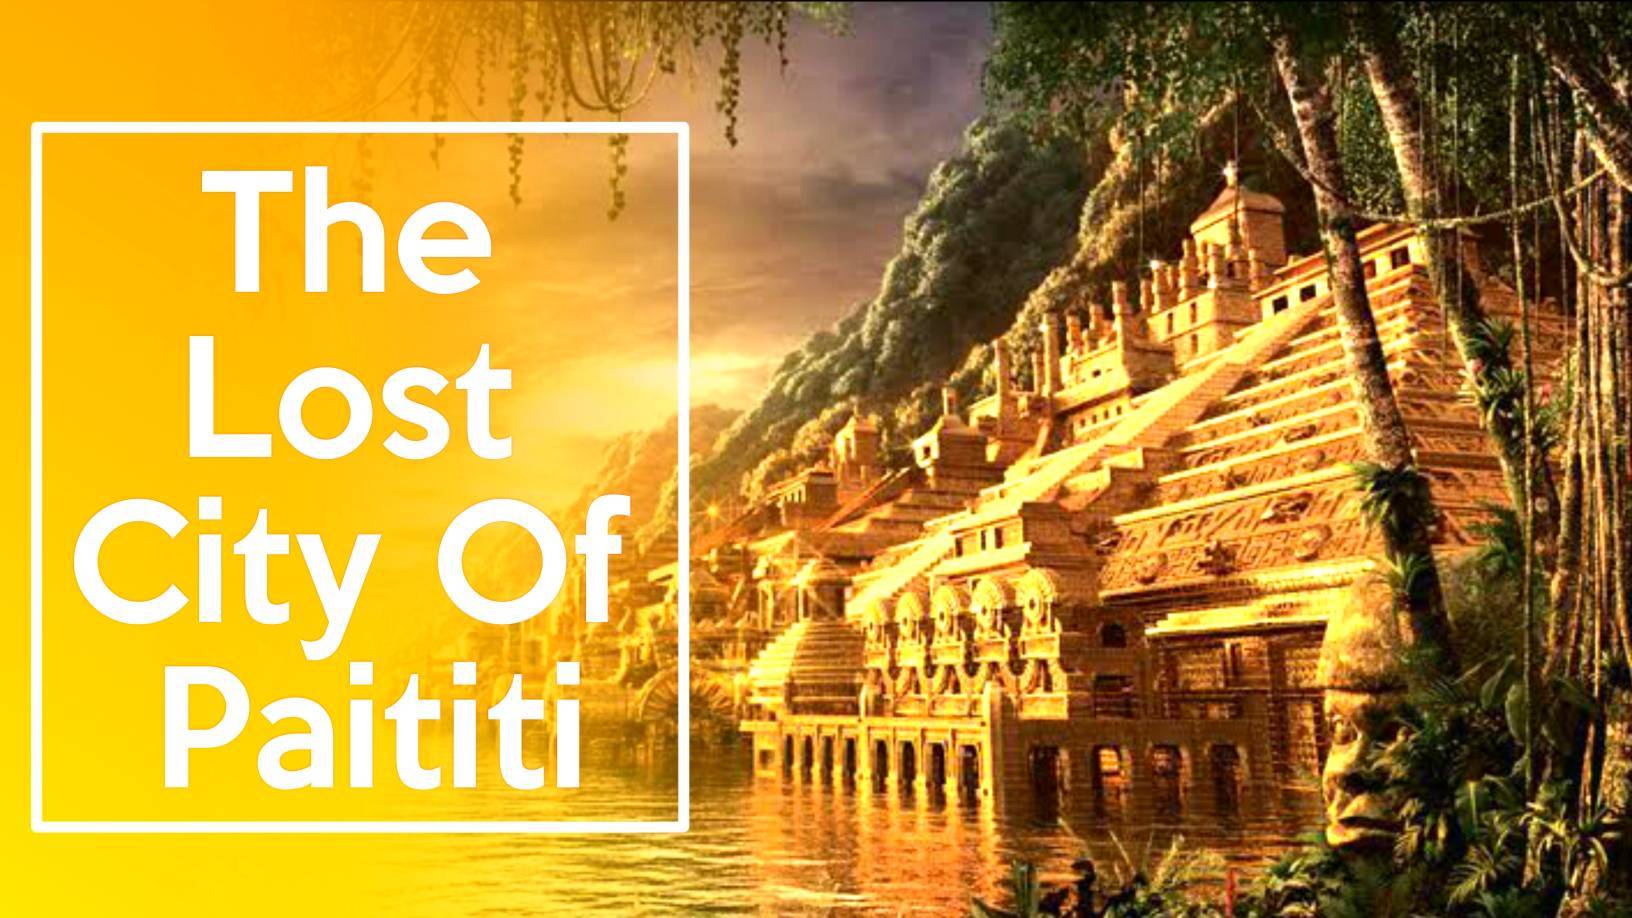 Has the Lost City of Paititi been found?